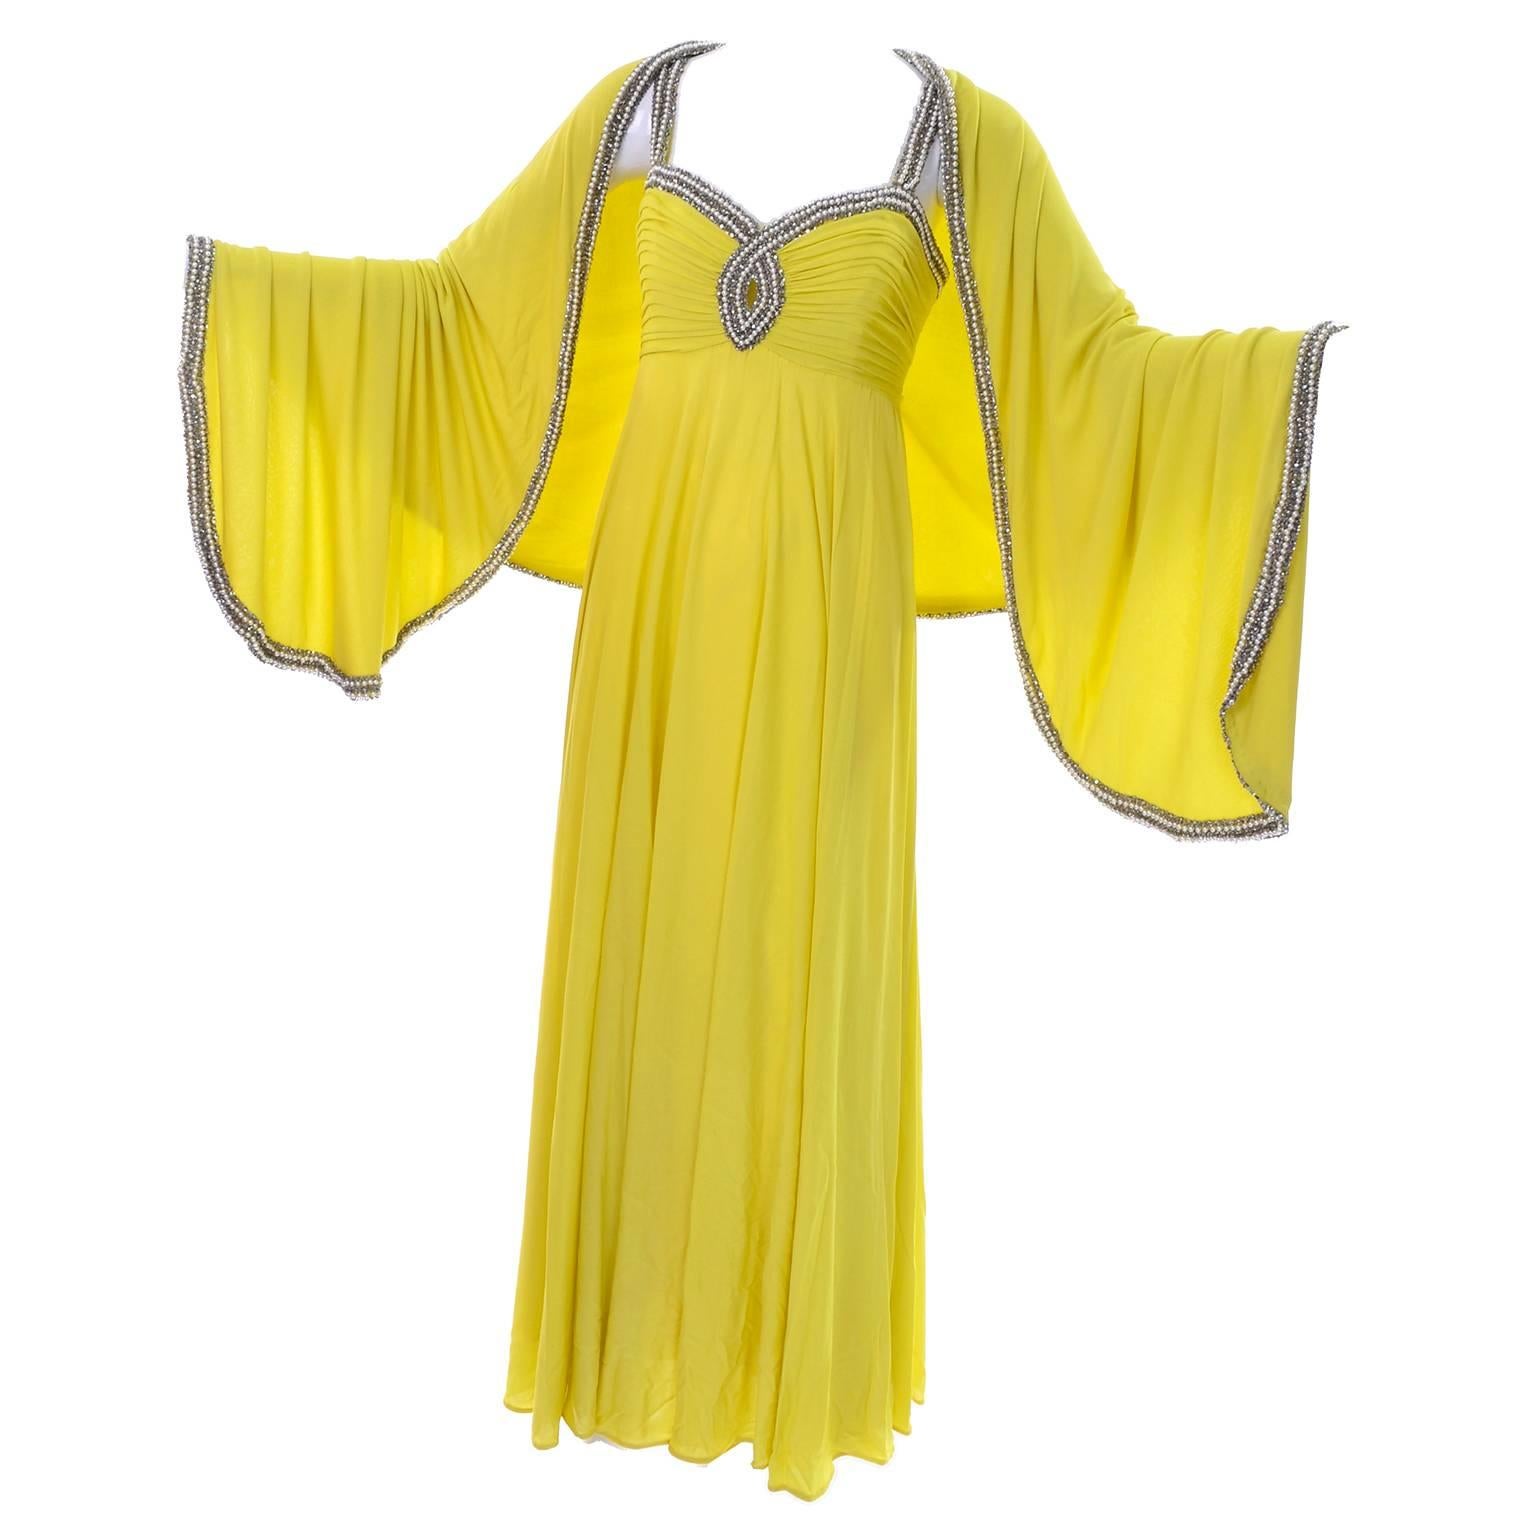 This is an exquisite chartreuse yellow - green silk chiffon vintage evening gown that comes with a matching beaded wrap. The dress was made in The British Crown Colony of Hong Kong by Seaton Enterprises Ltd. in the 1960's. There is a front keyhole